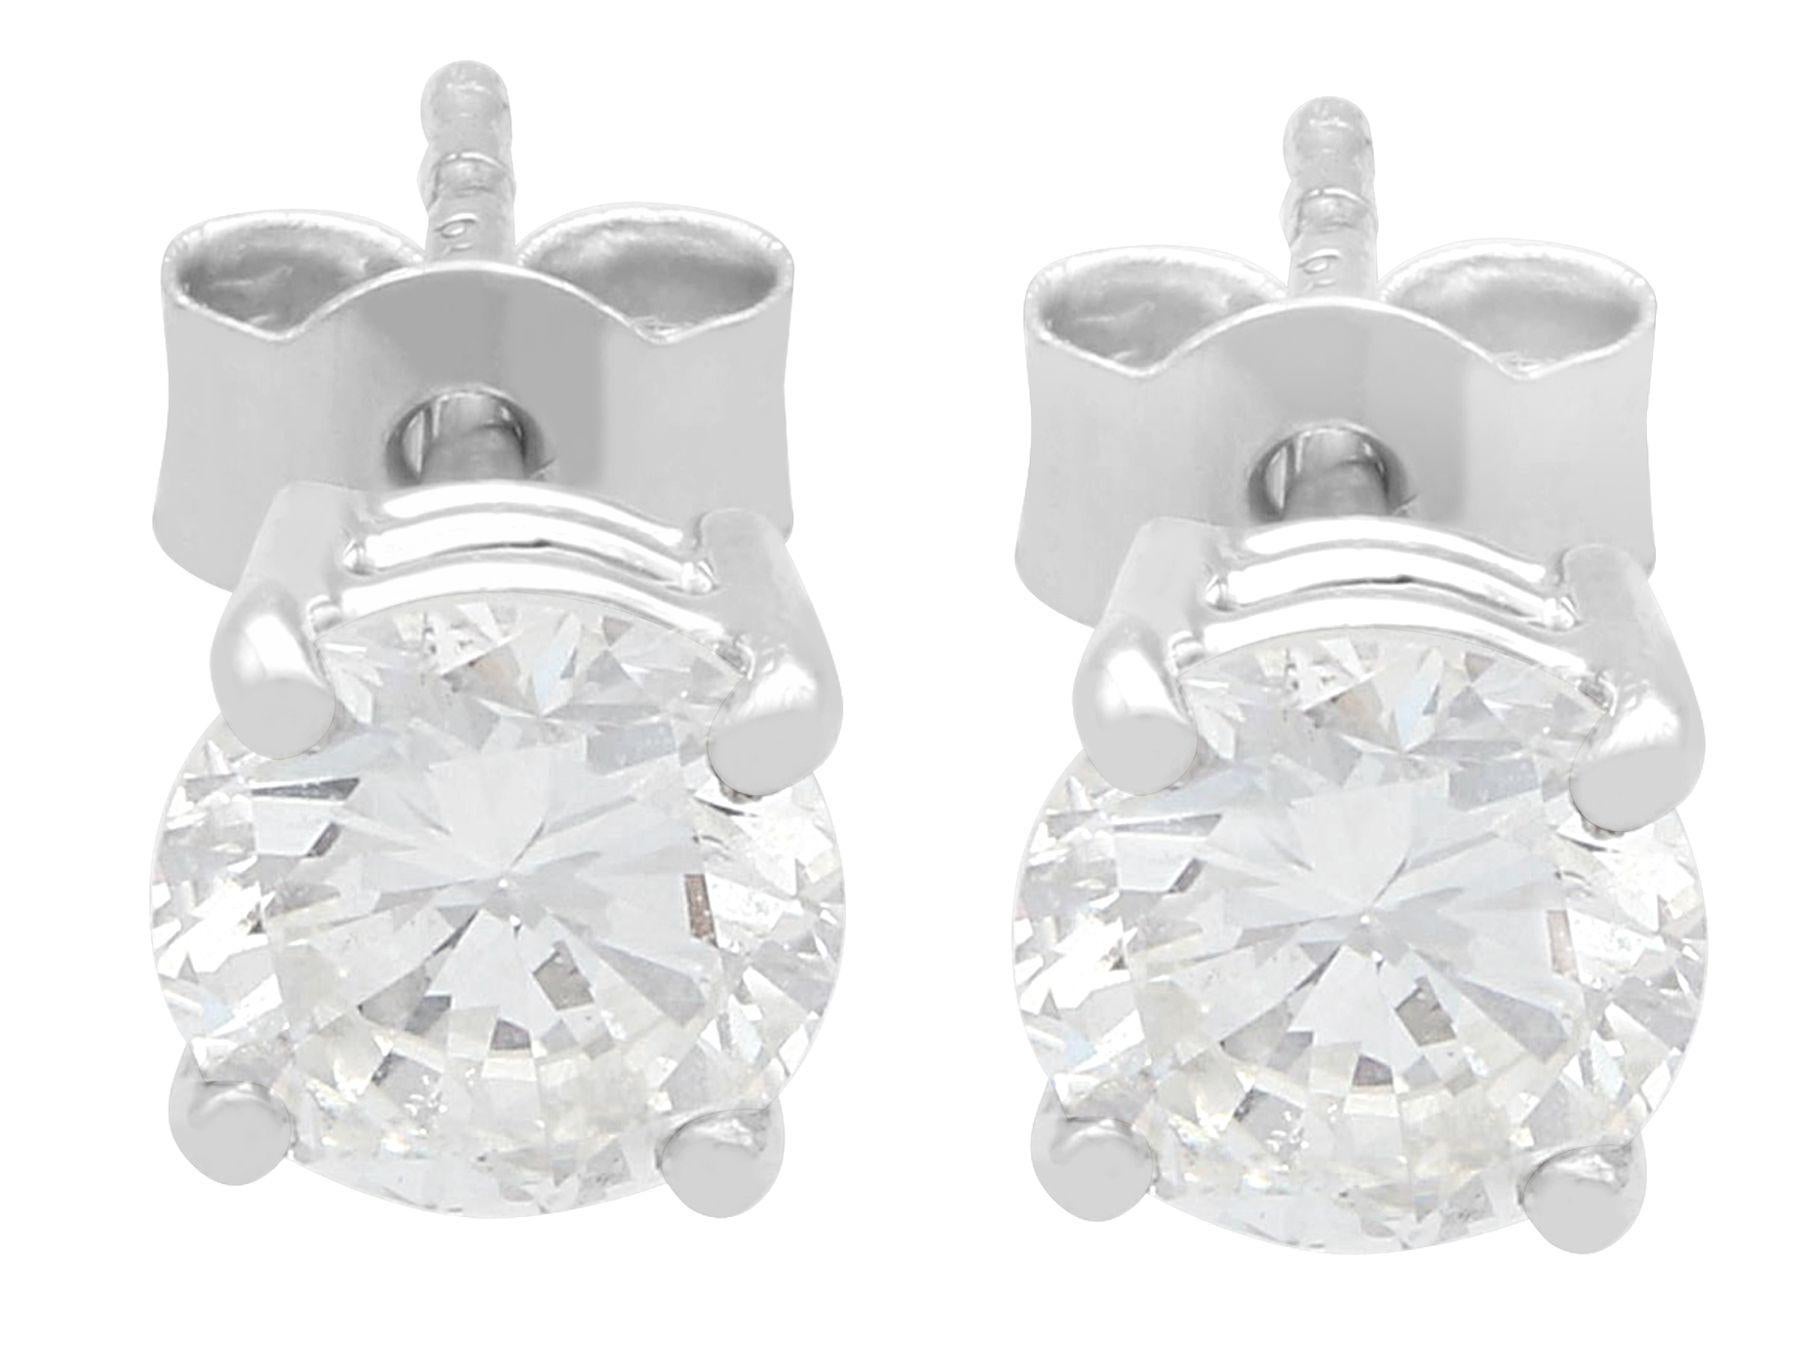 A stunning, fine and impressive pair of vintage and contemporary 1.41 carat diamond and platinum stud earrings; part of our diverse diamond jewelry and estate jewelry collections.

These stunning, fine and impressive diamond stud earrings have been